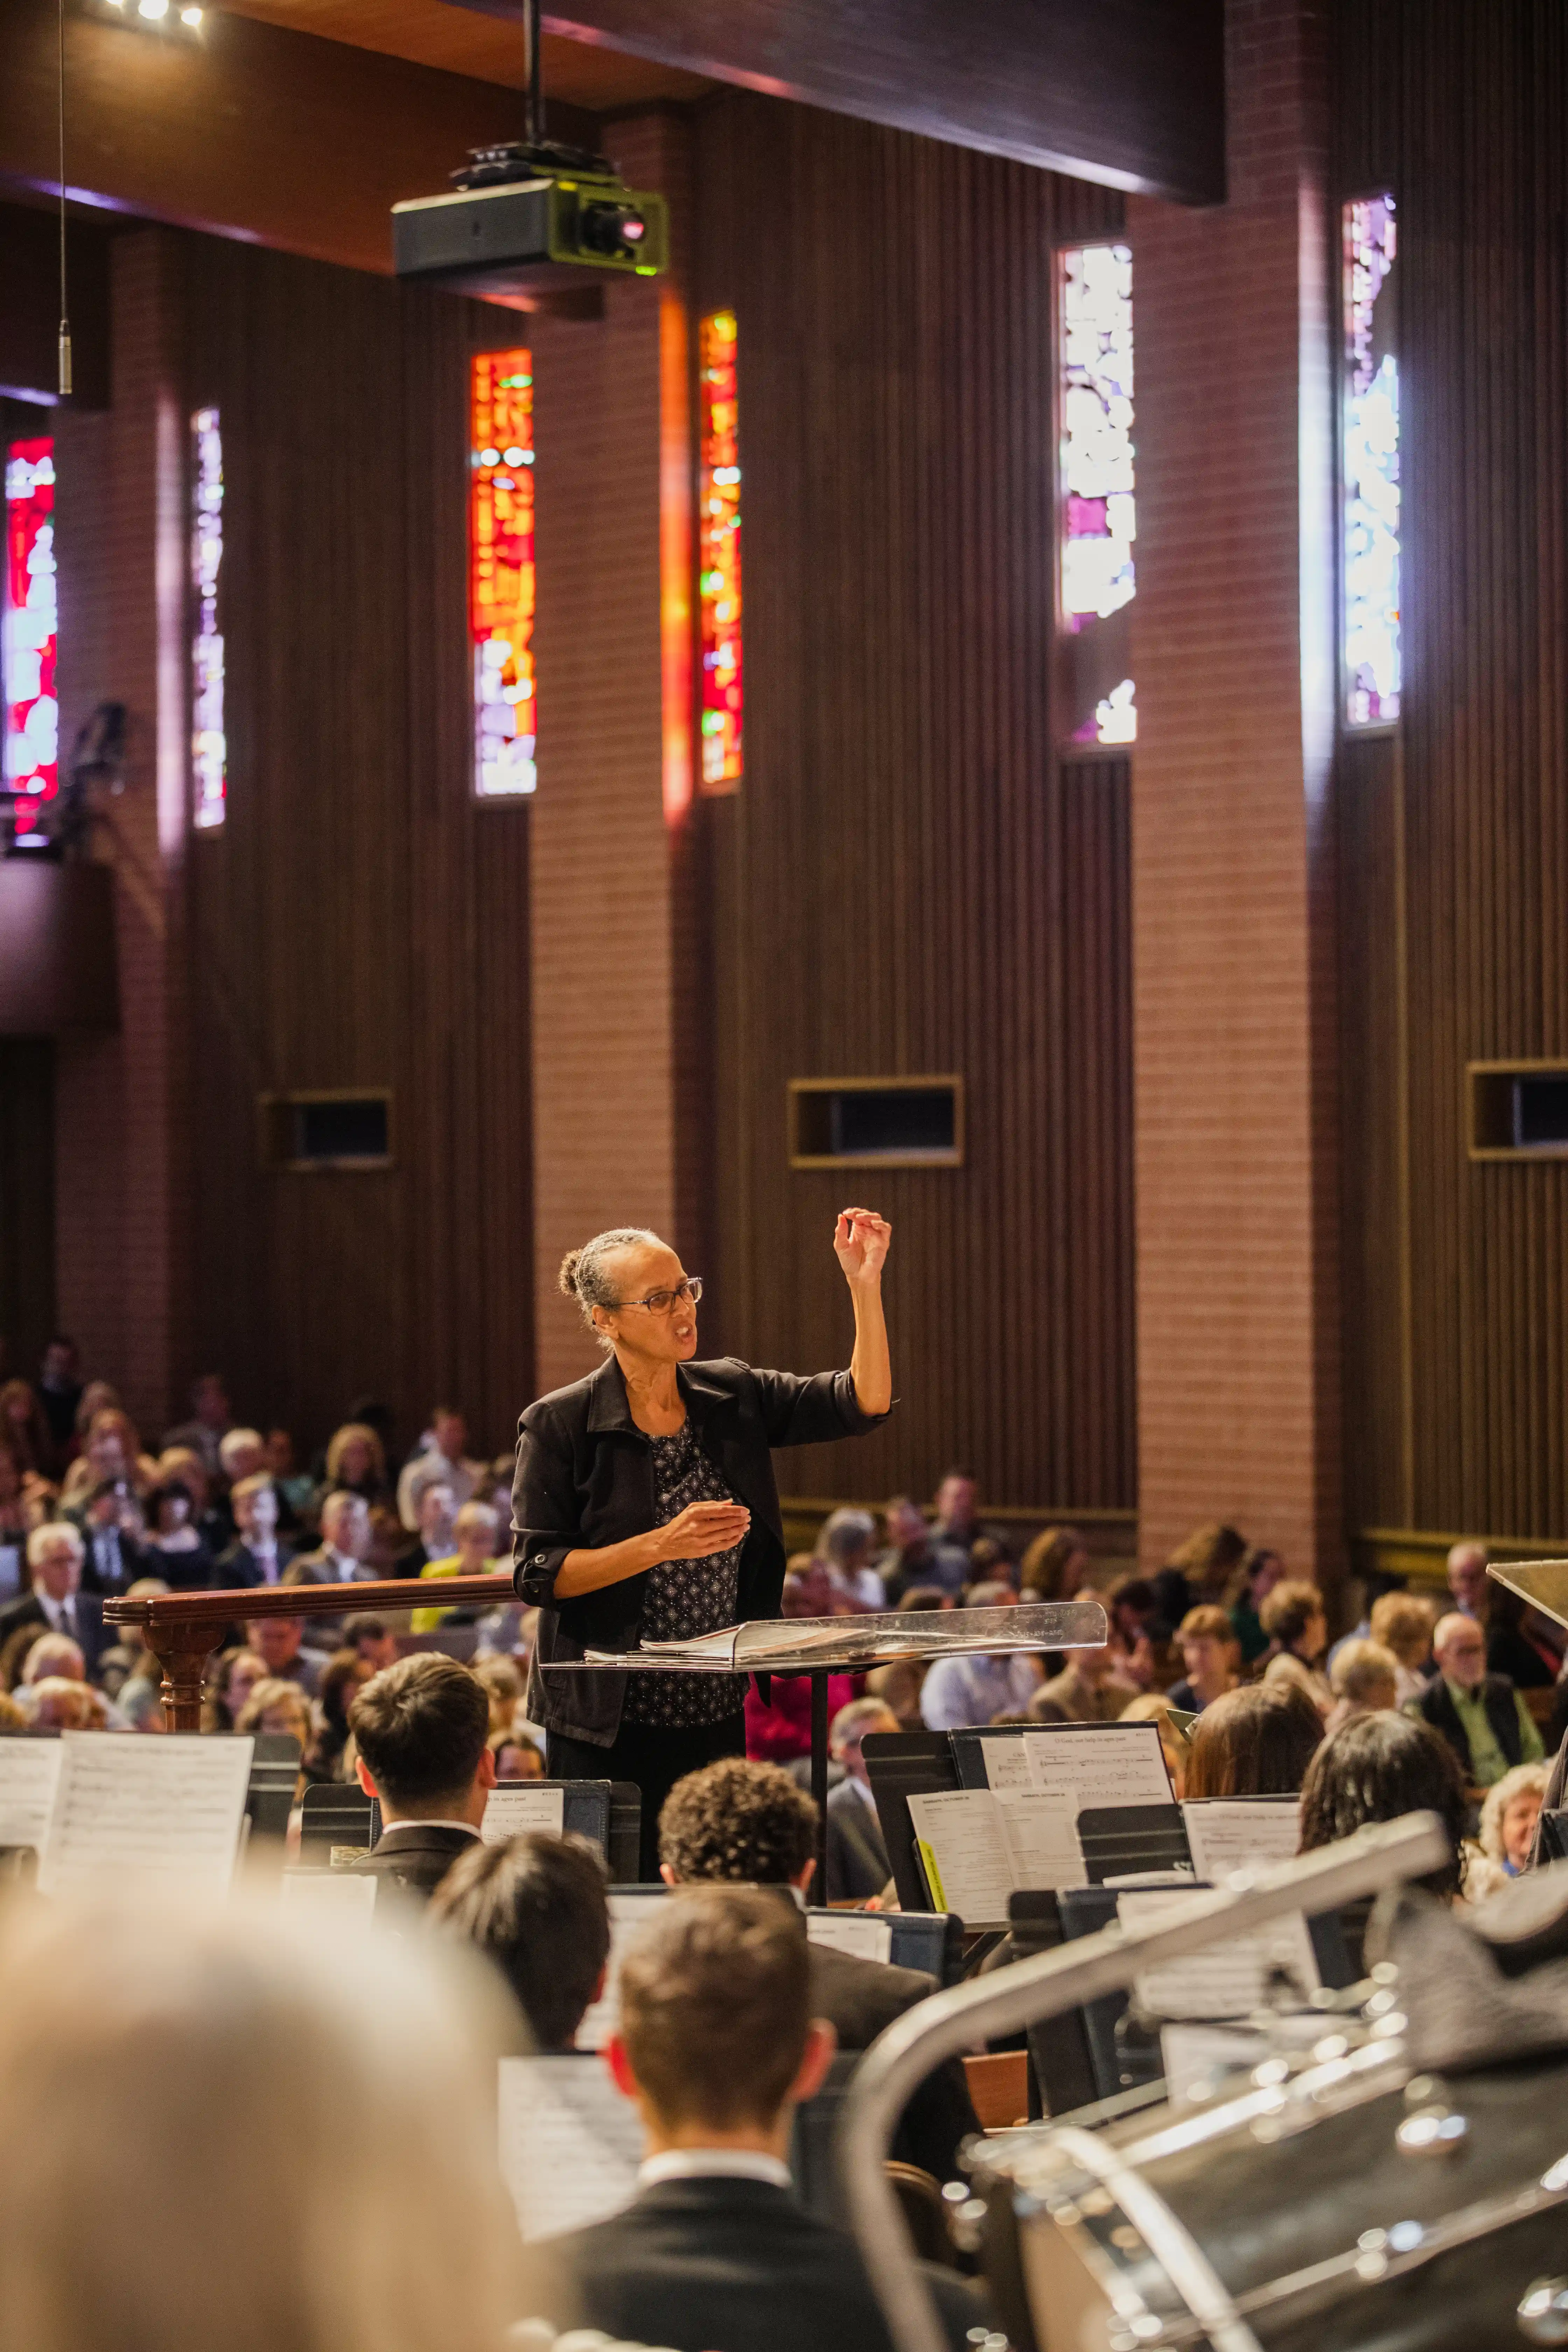 A music conductor conducting